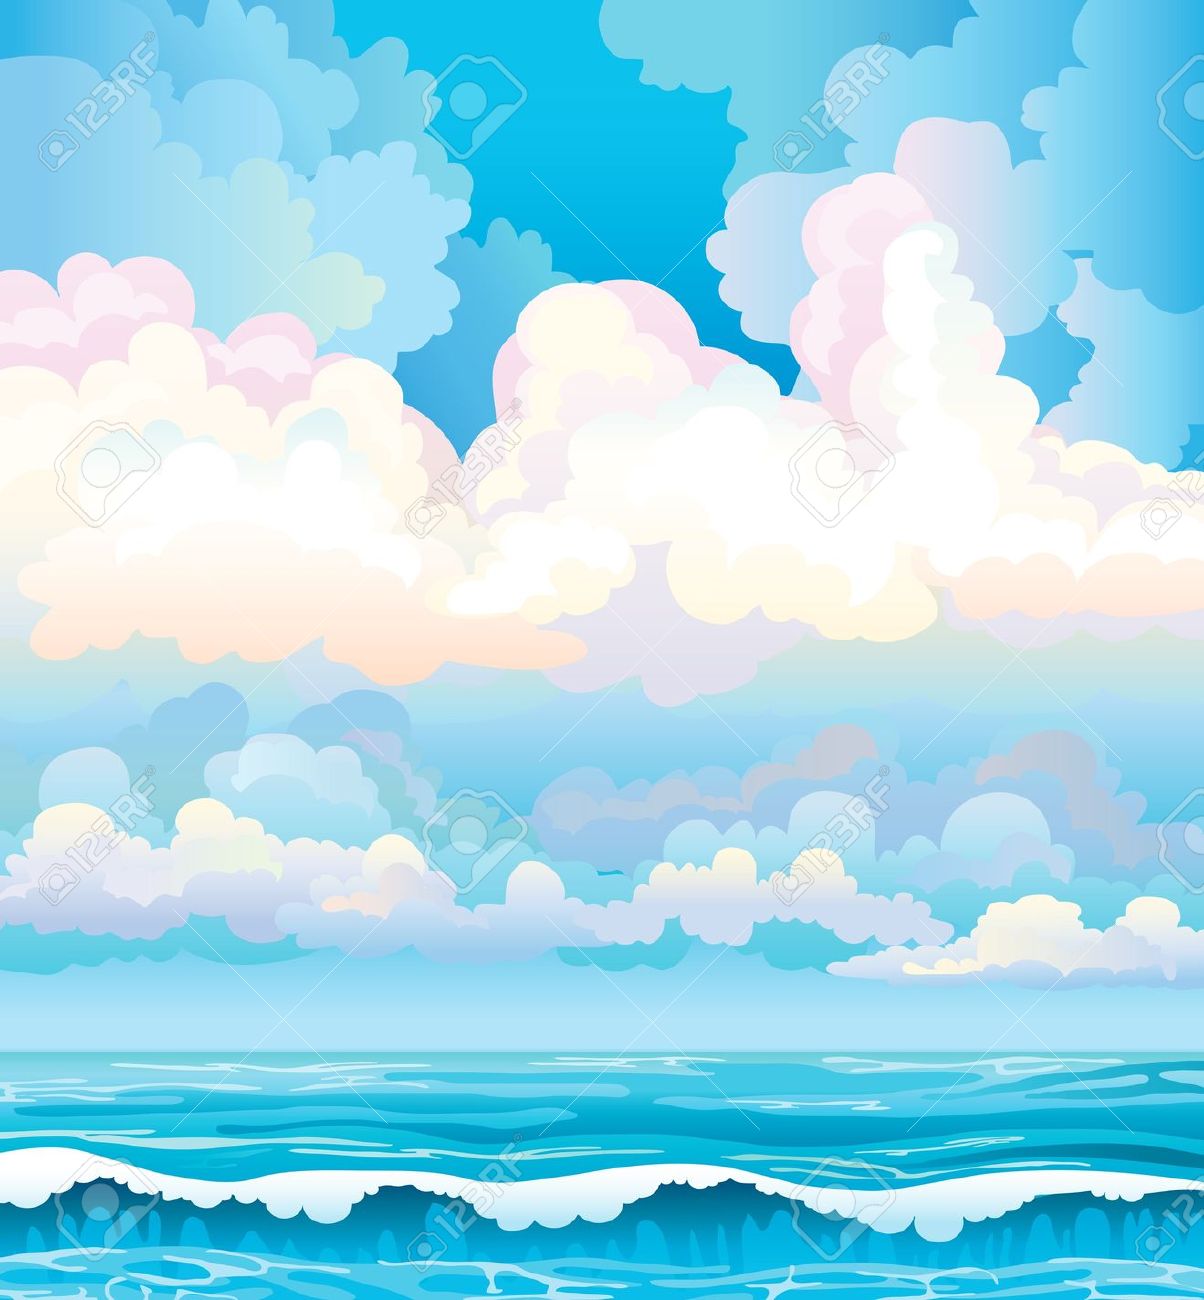 water background clipart - photo #40